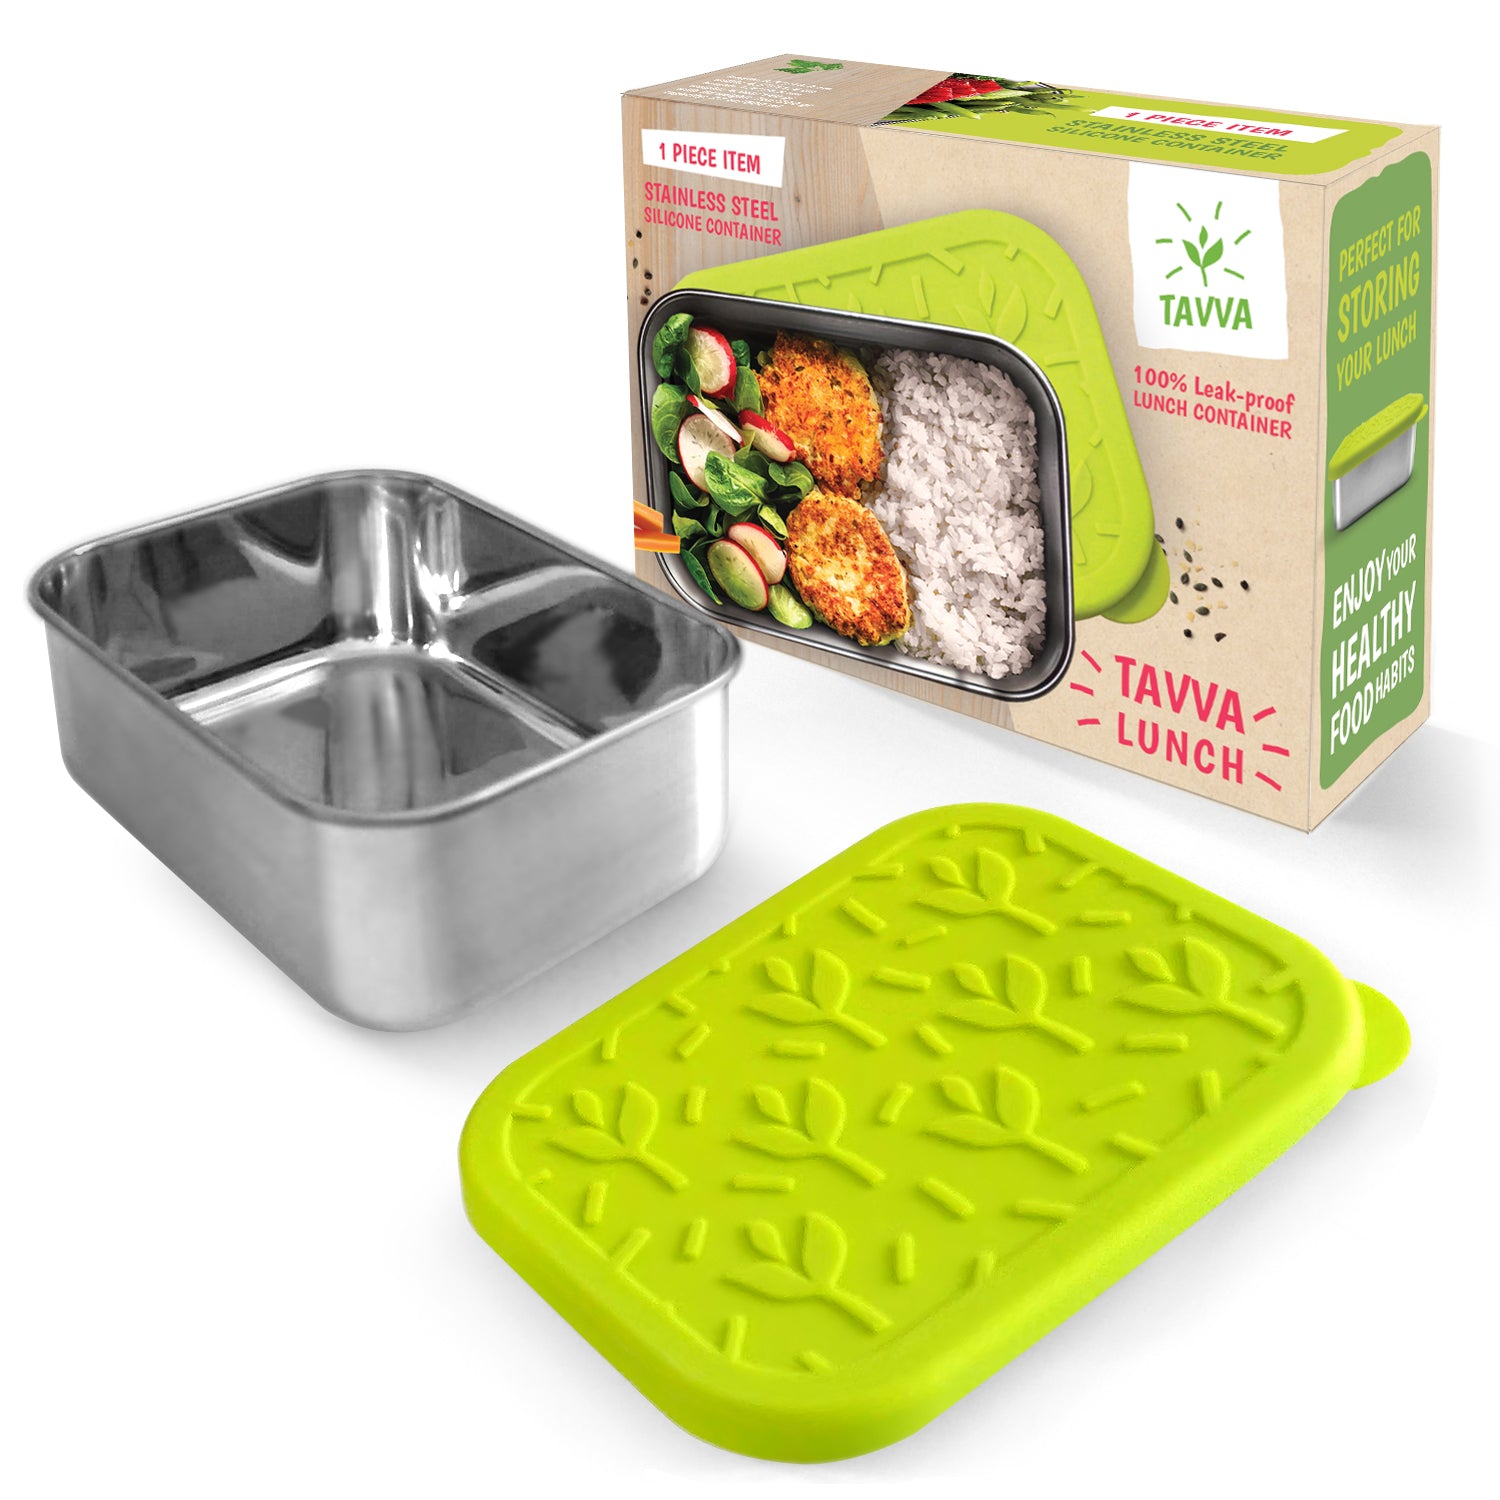 Tavva® Lunch 23oz Deluxe Stainless Steel Container